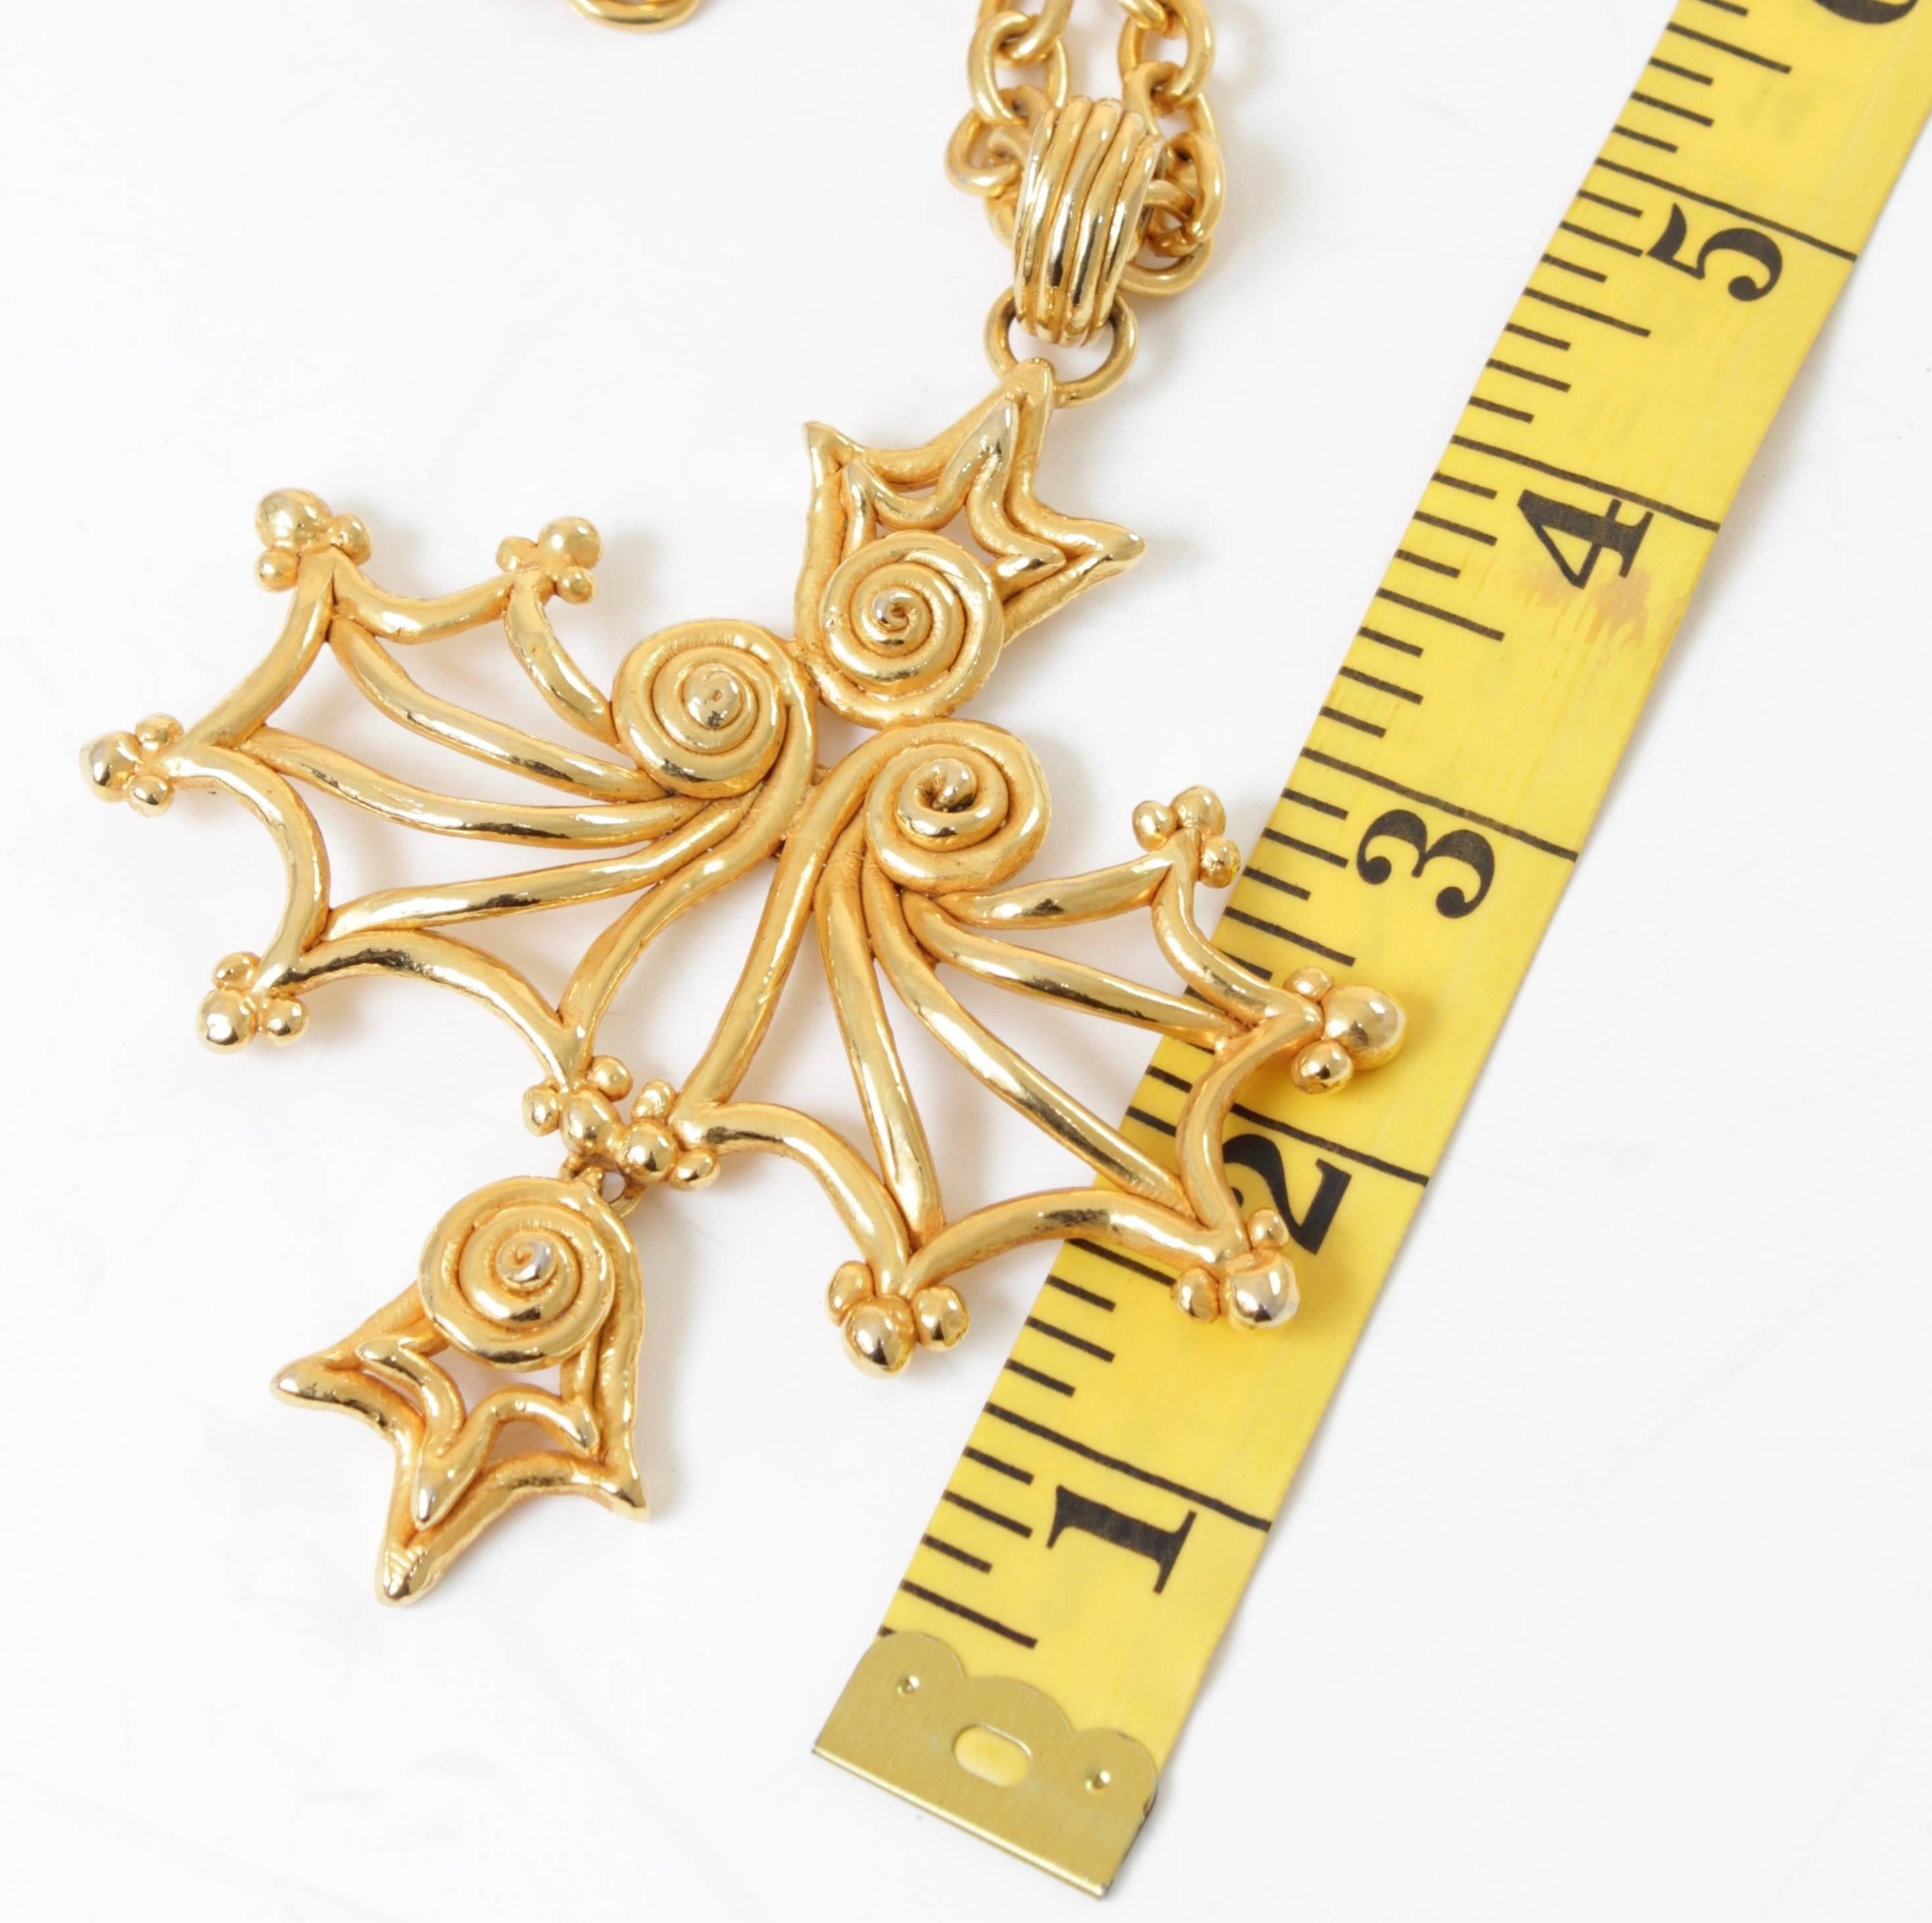 This massive abstract pendant and necklace was made by Sonia Rykiel Paris, most likely in the 1980s.  Made from gold metal, the pendant measures 4in H and the chain is adjustable for up to a 15in drop with a simple hook (total chain length is 30in).